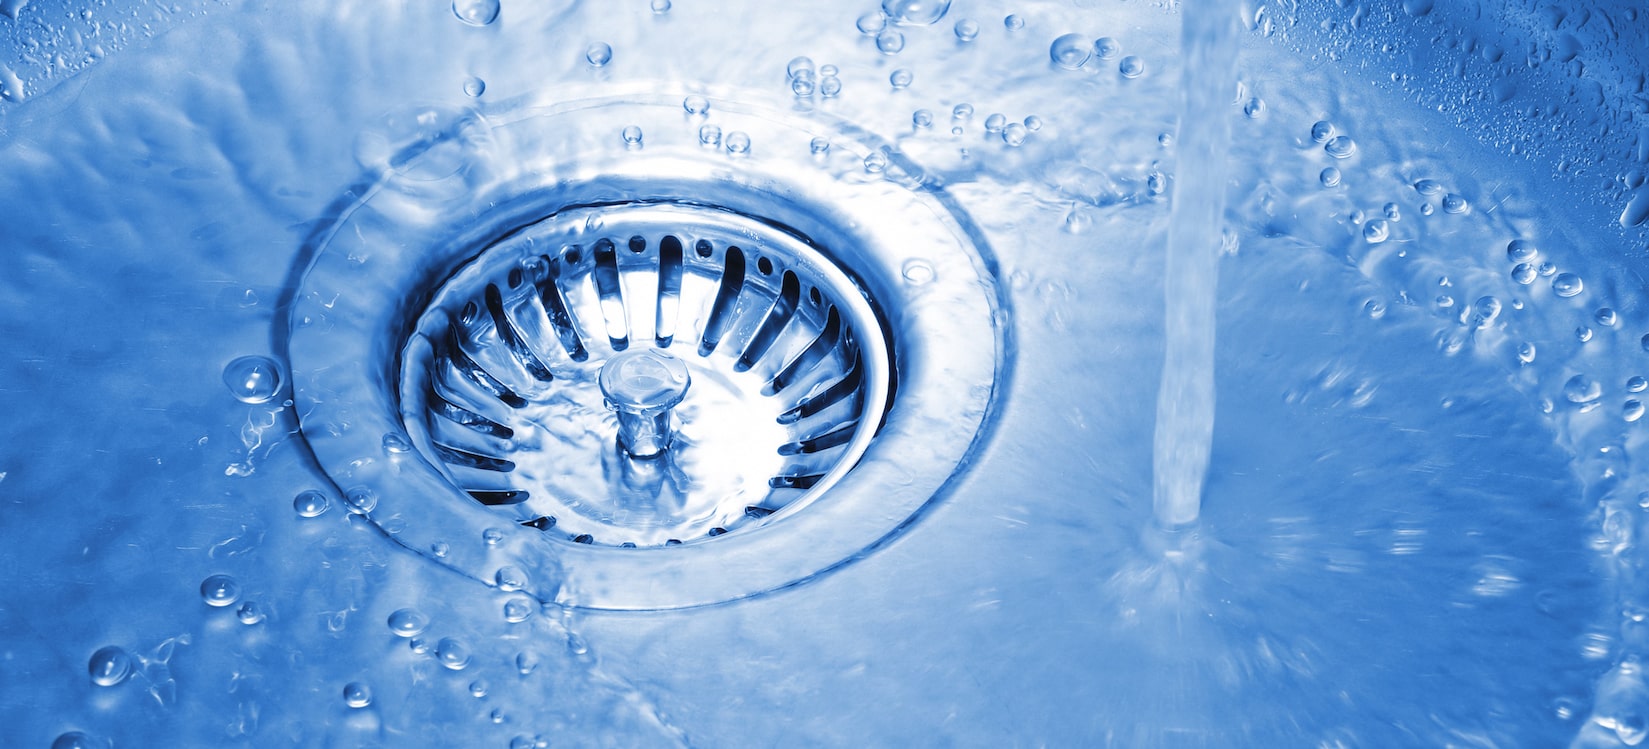 Naperville Drain Cleaning and Drain Clearing